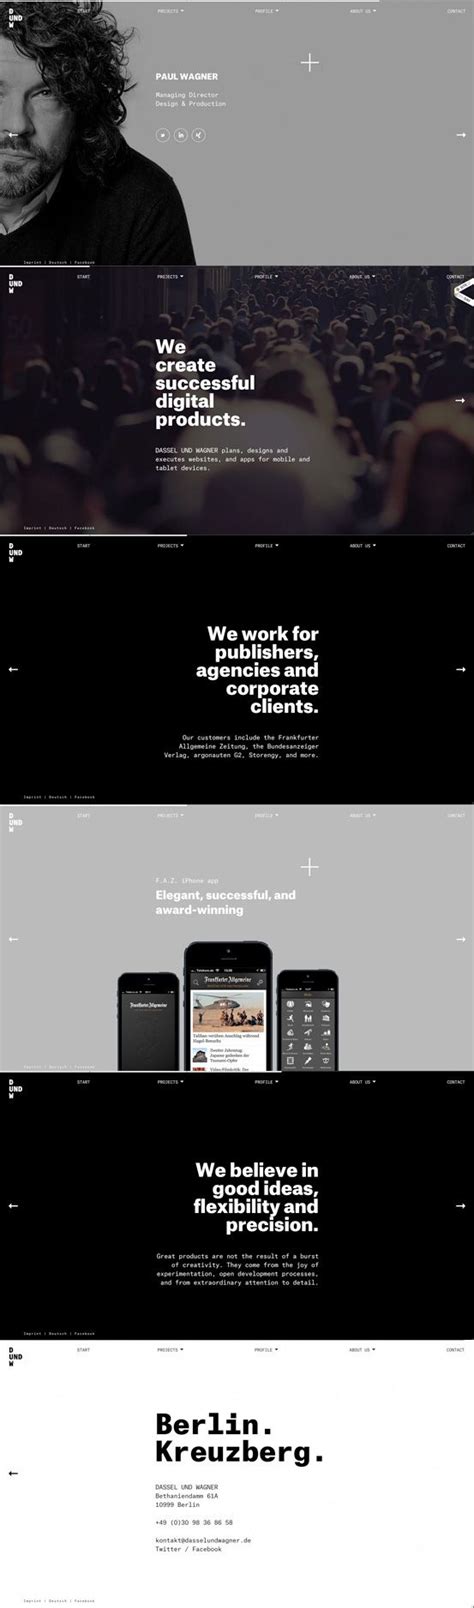 15 Great Website Layout Ideas For Inspiration